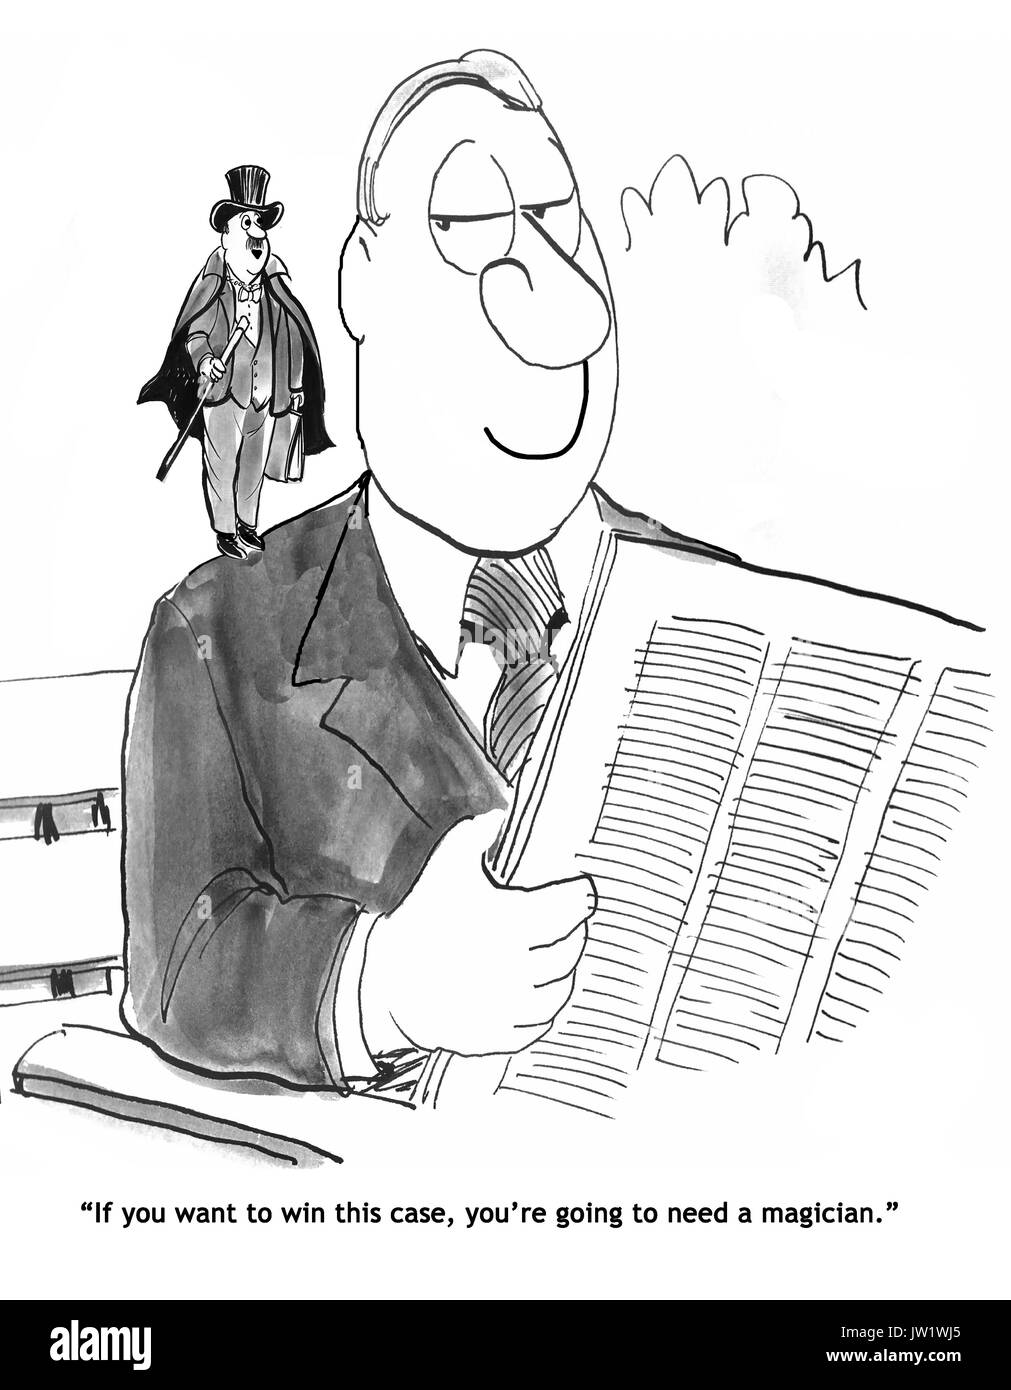 Legal cartoon about needing a magician to win the case. Stock Photo